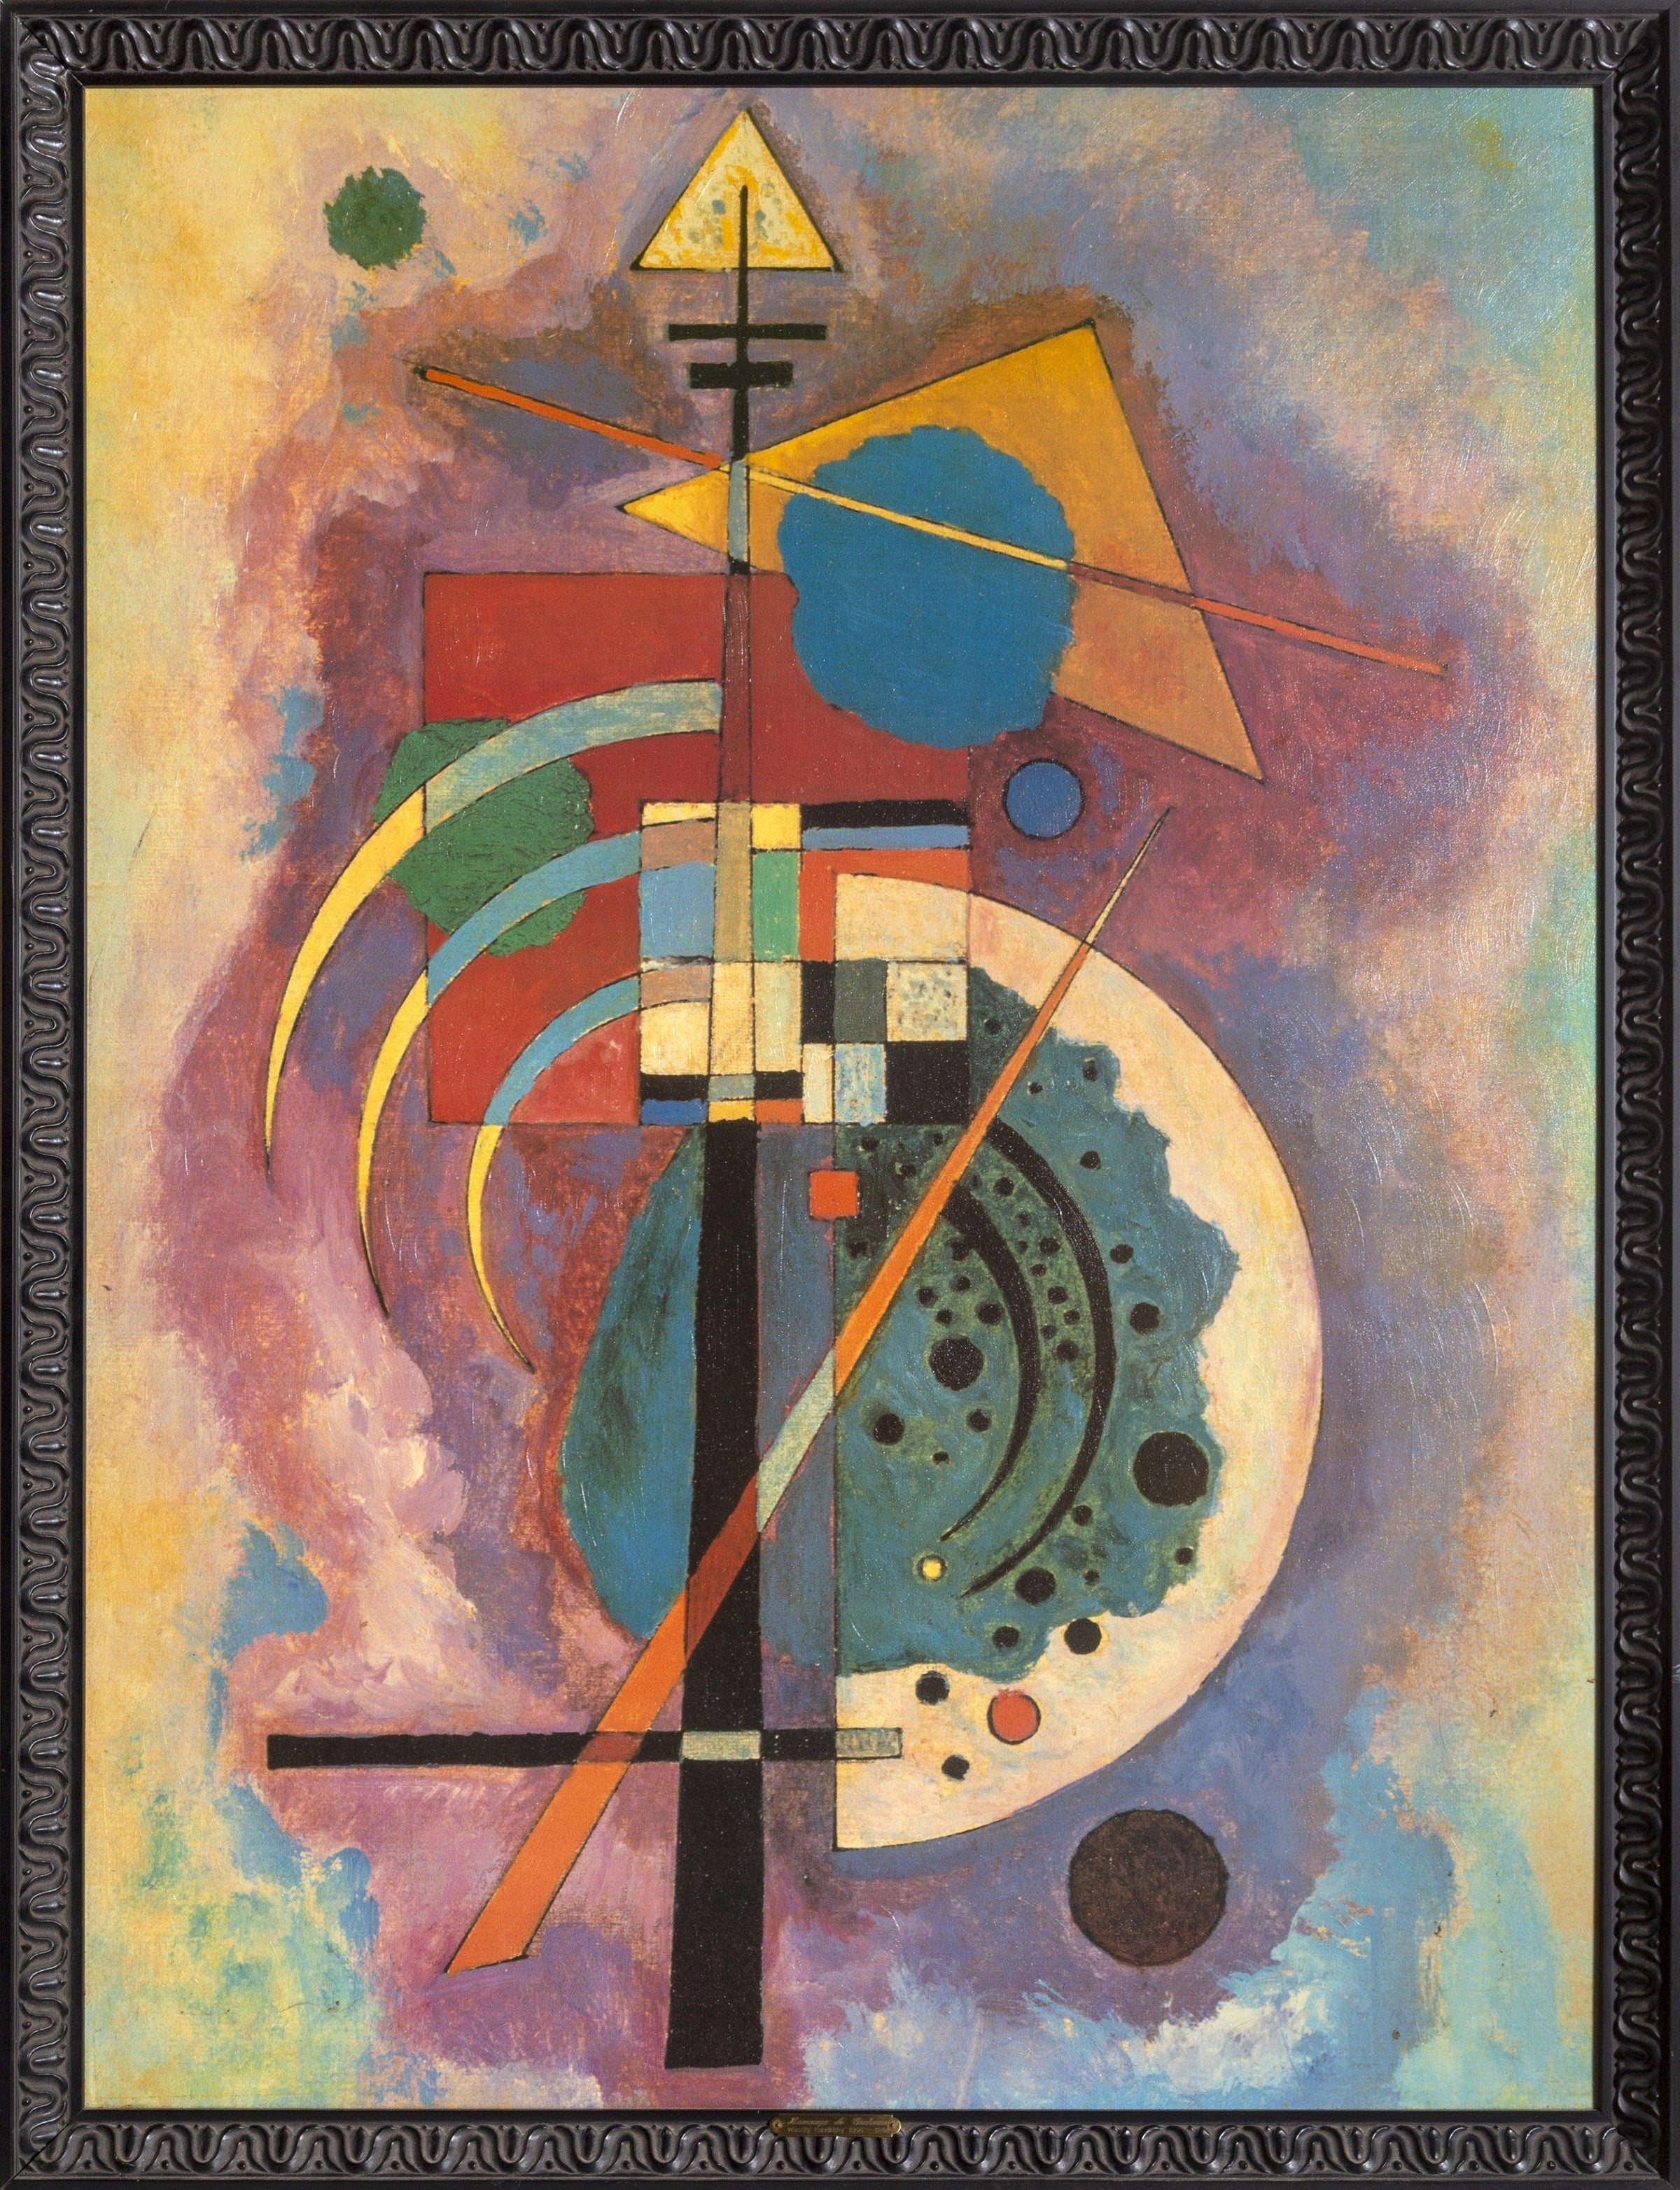 Wassily Kandinsky on How to Be an Artist